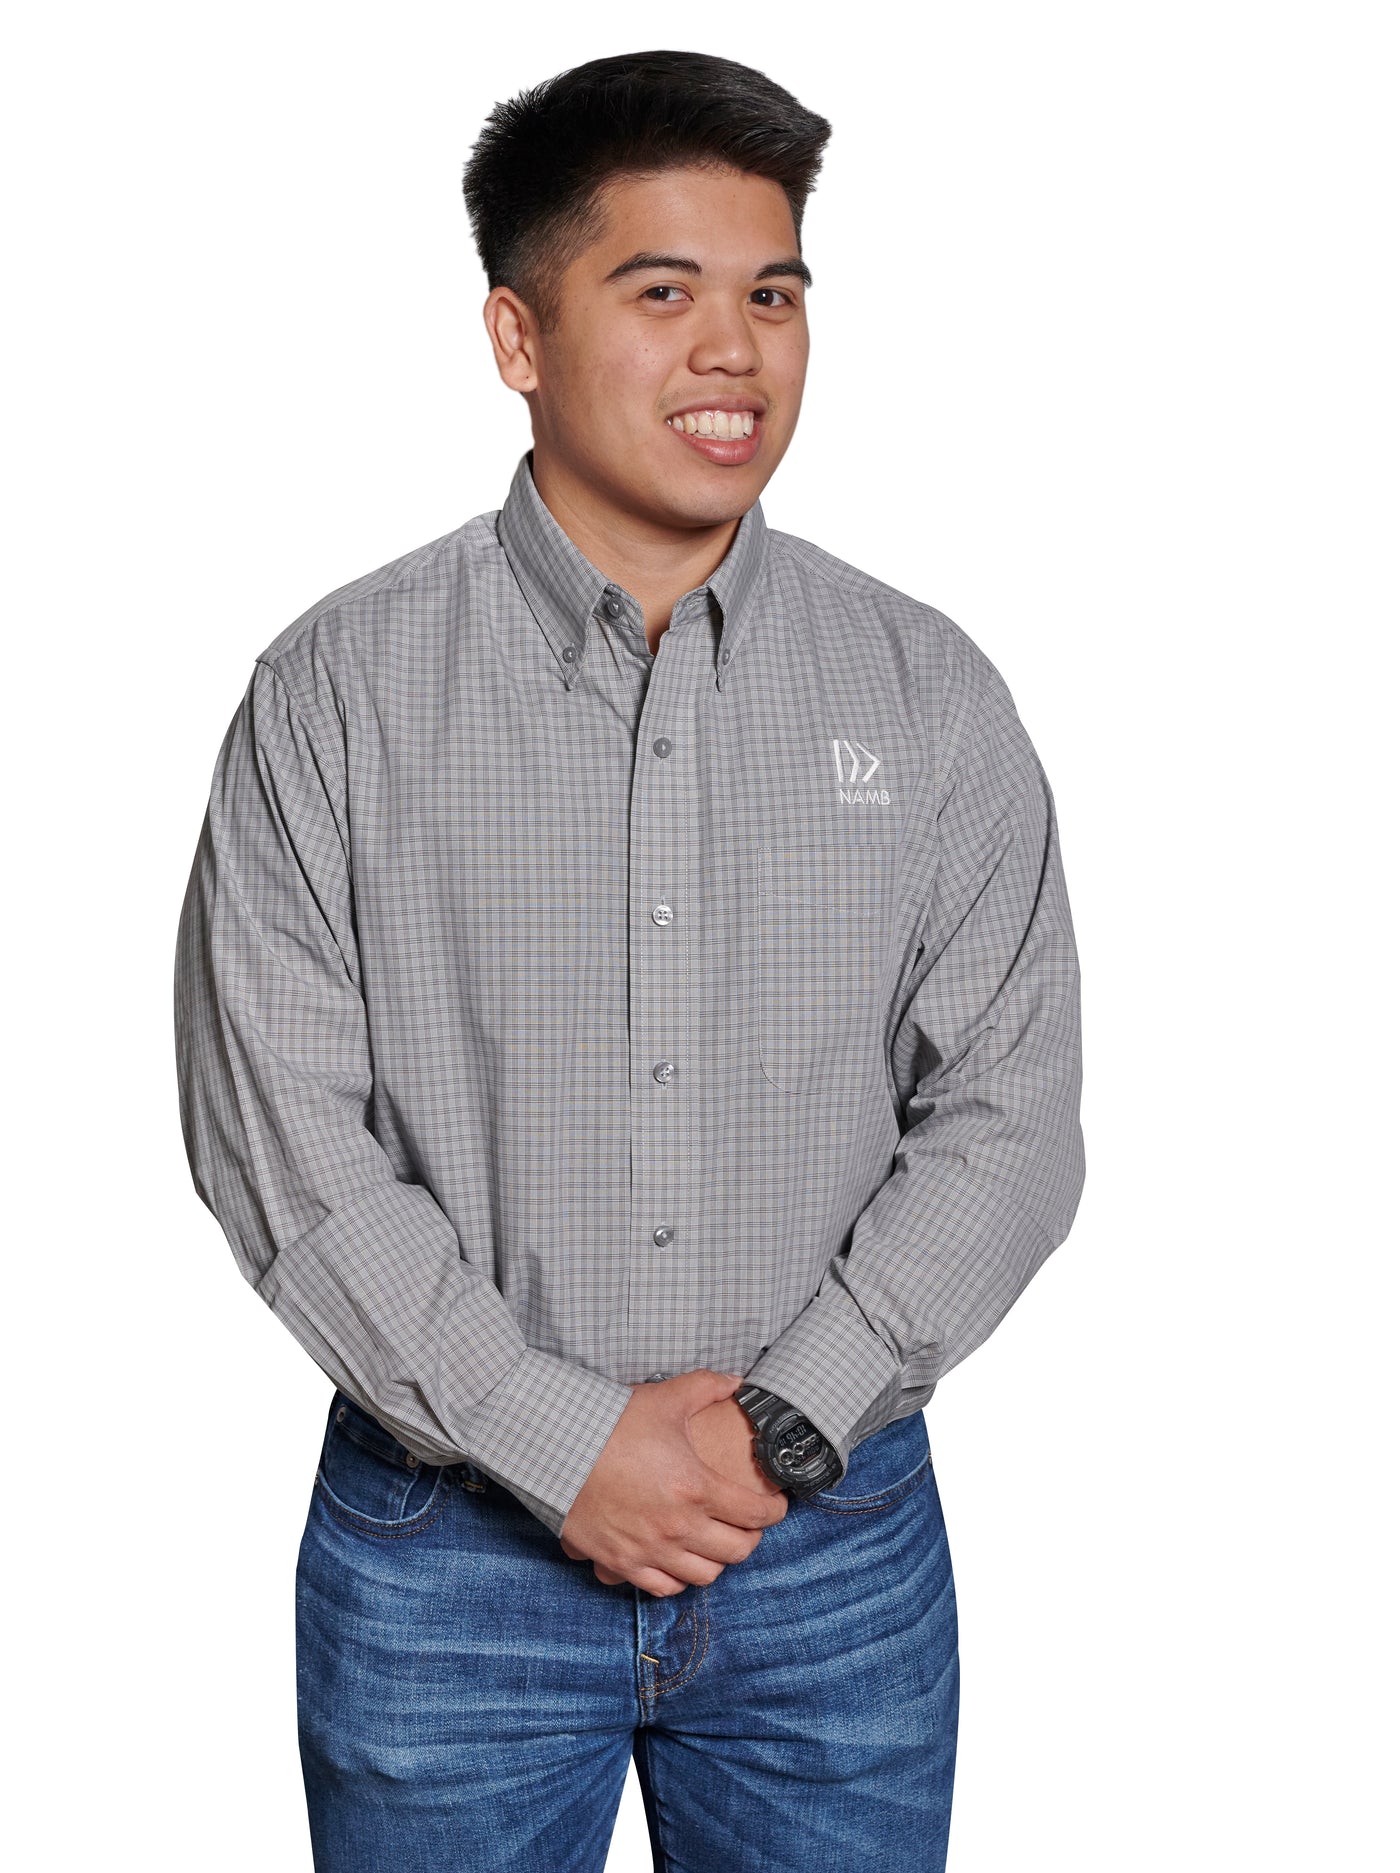 NAMB Port Authority Gingham Button Down (Gray)